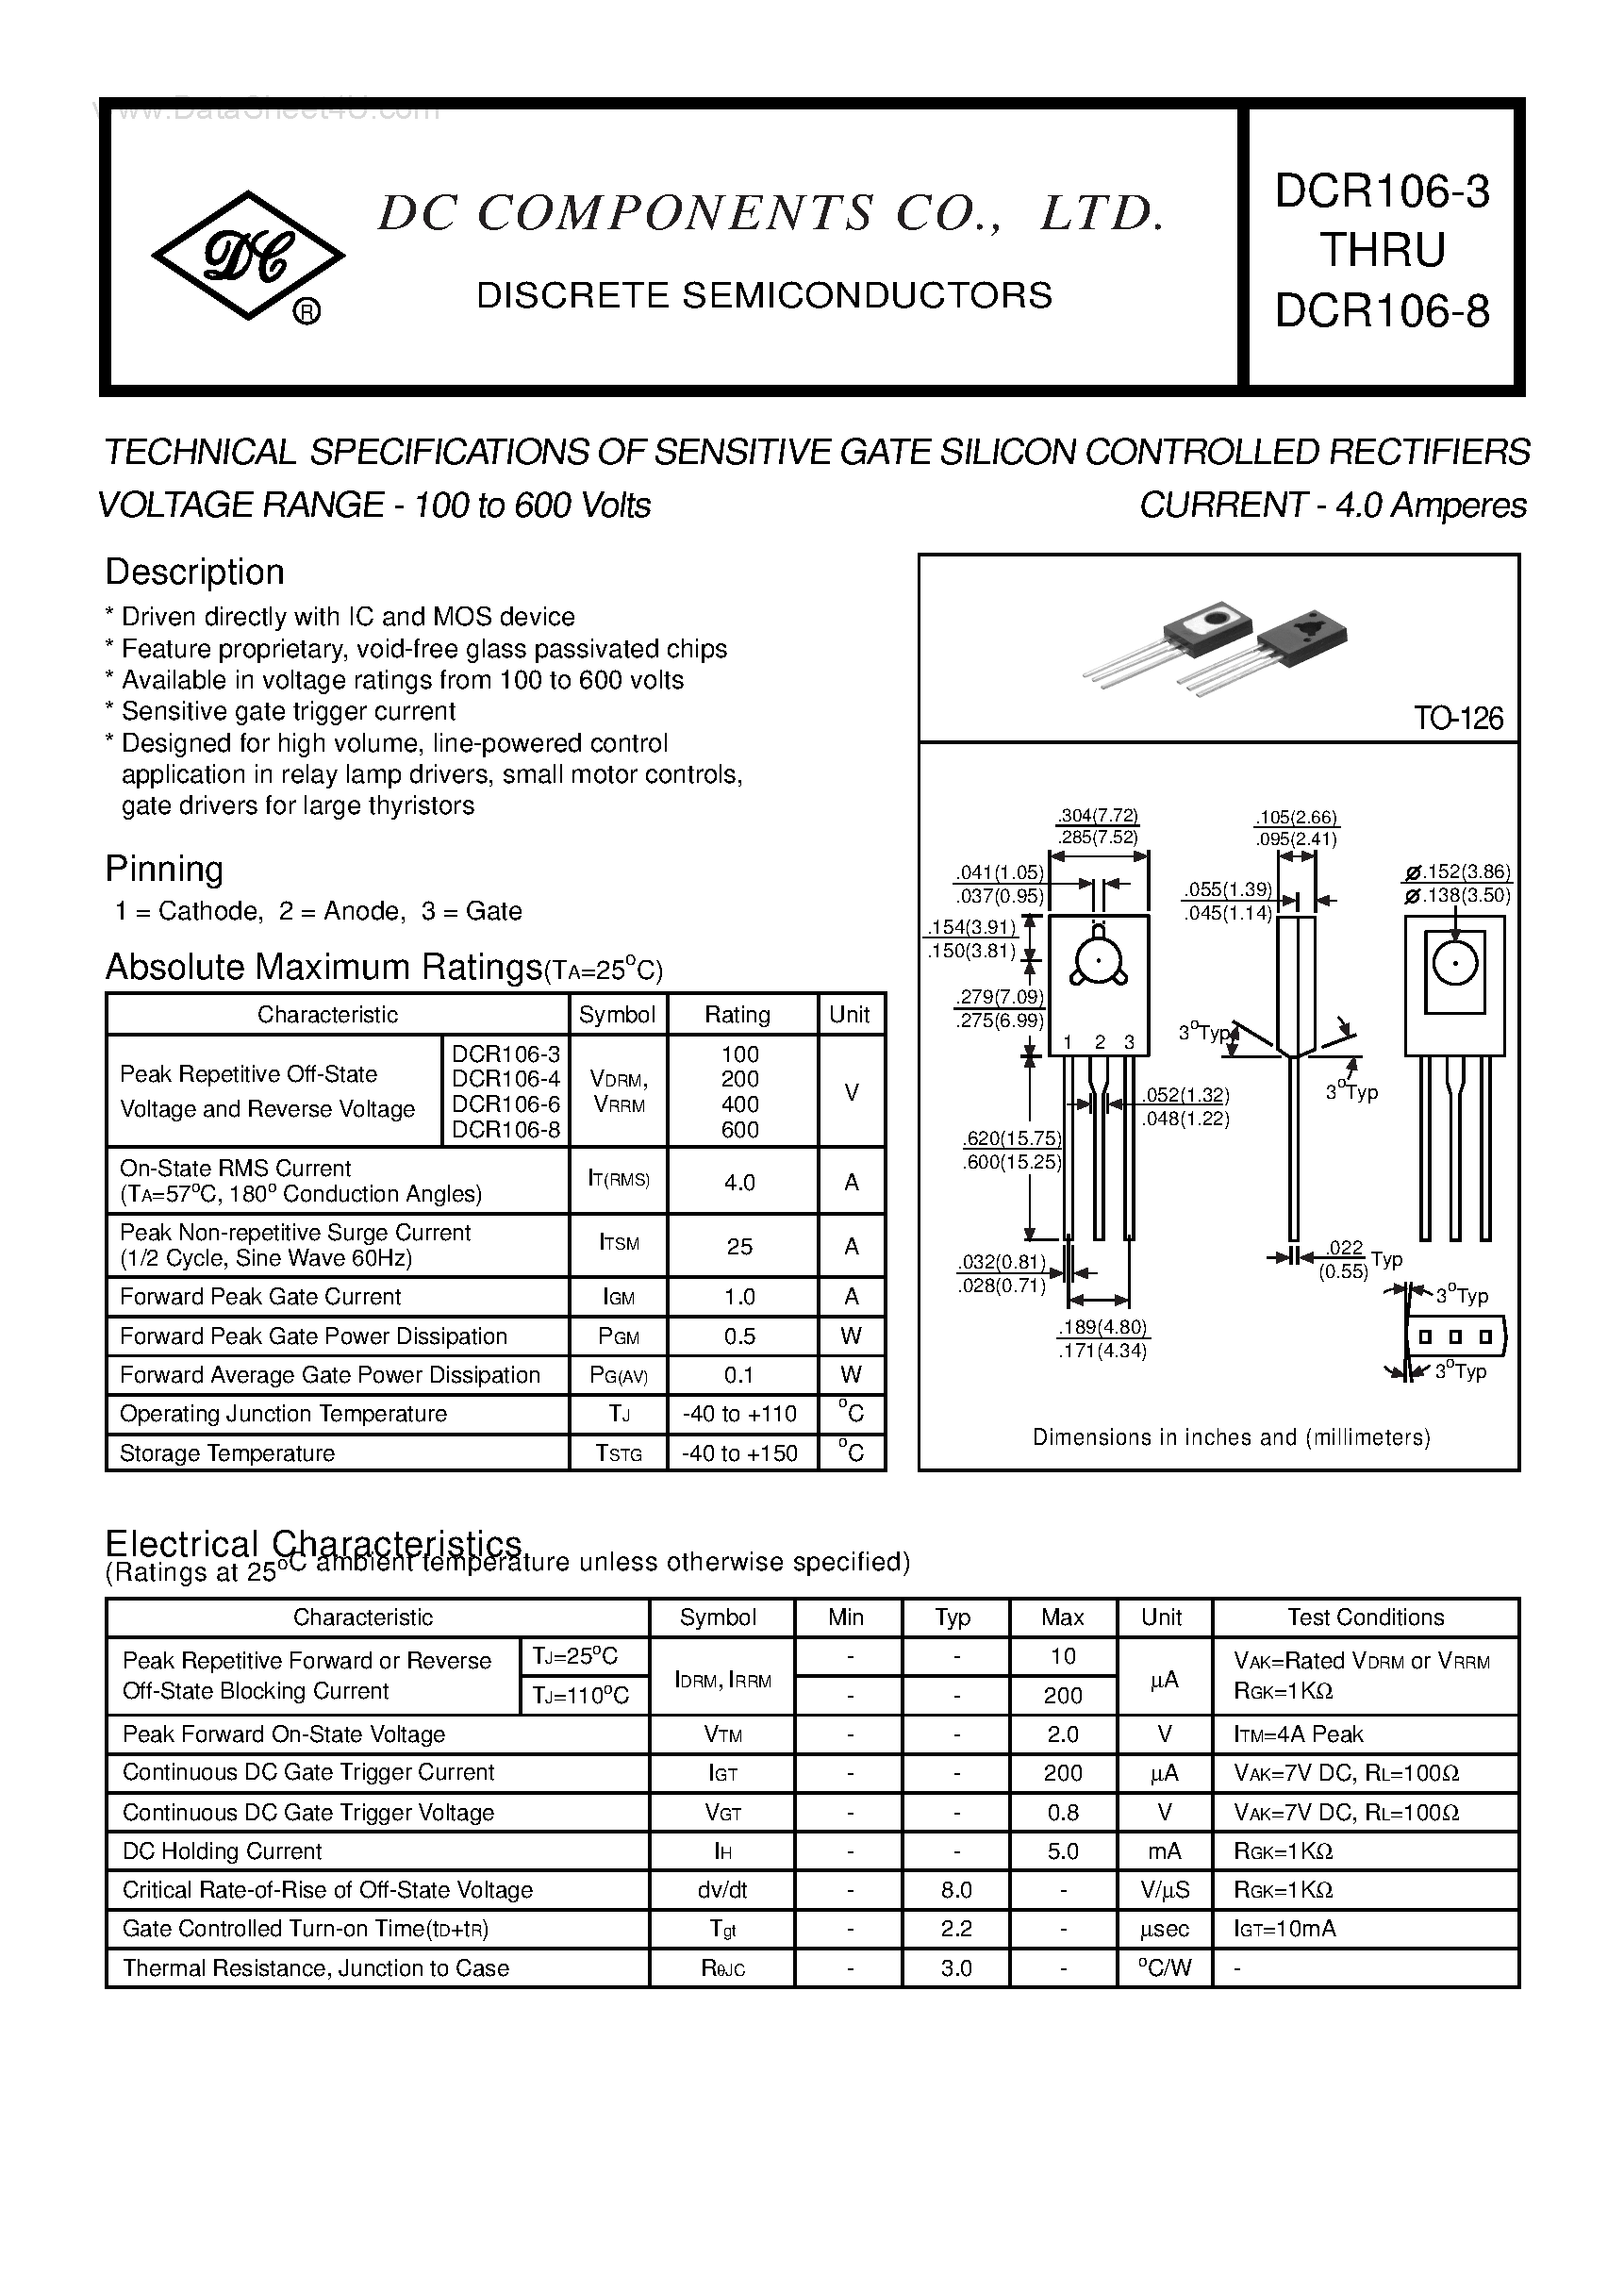 Даташит DCR106-3 - (DCR106-3 - DCR106-8) TECHNICAL SPECIFICATIONS OF SENSITIVE GATE SILICON CONTROLLED RECTIFIERS страница 1